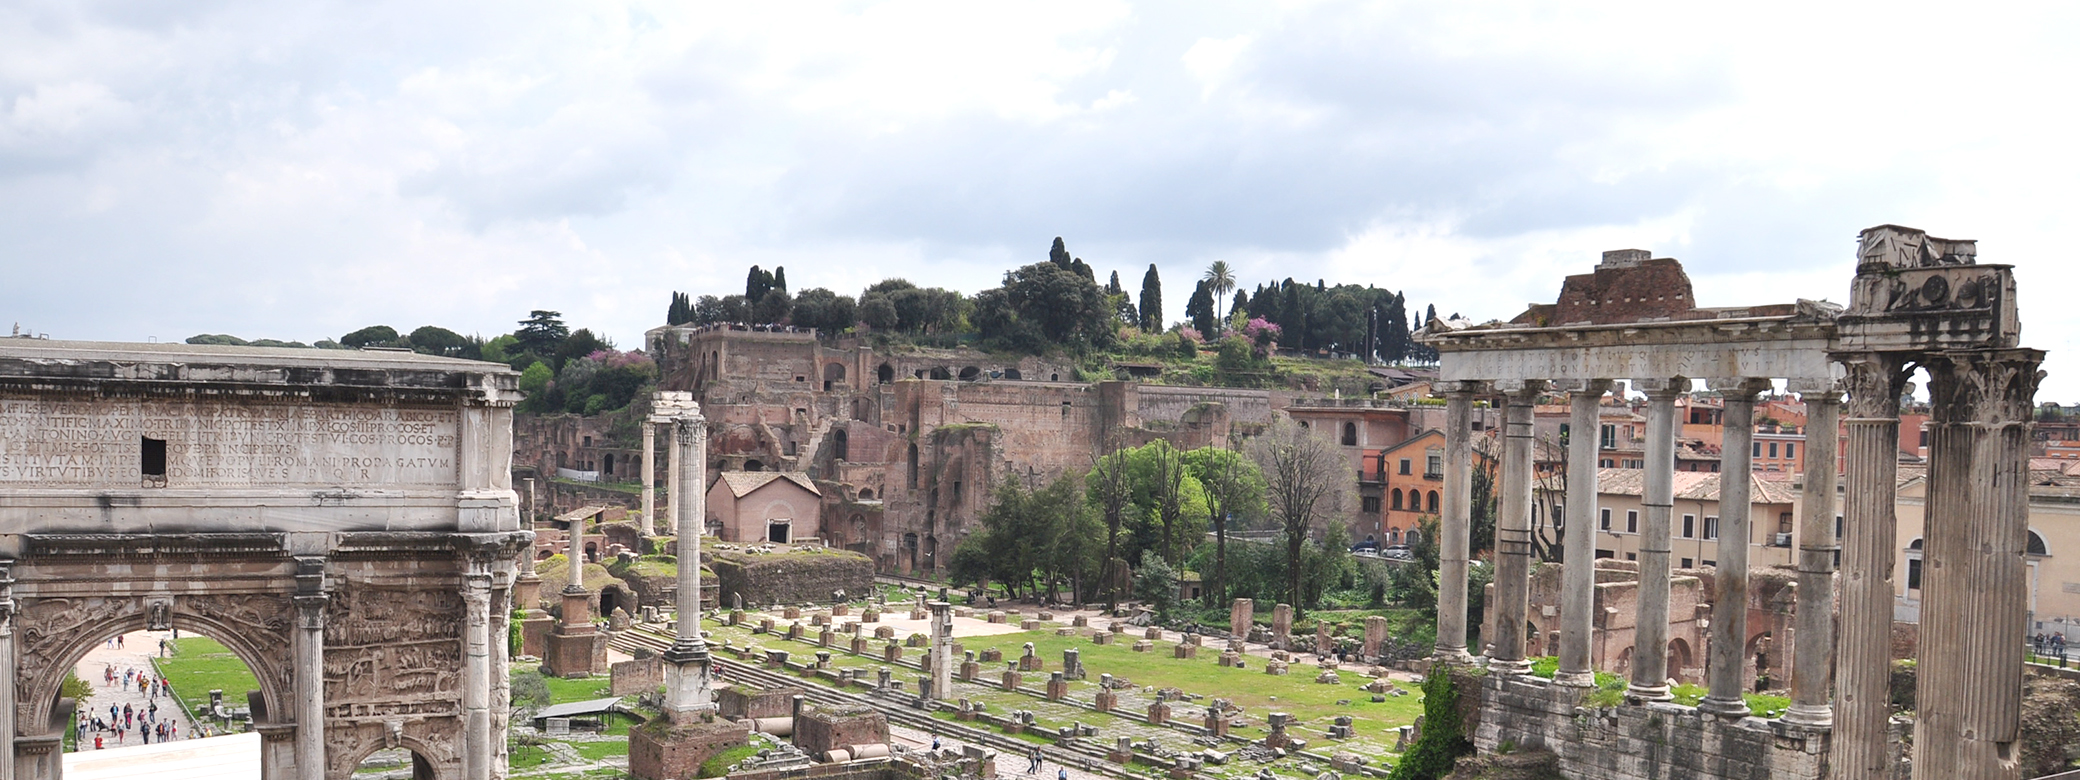 Expansive view of the Roman Forum